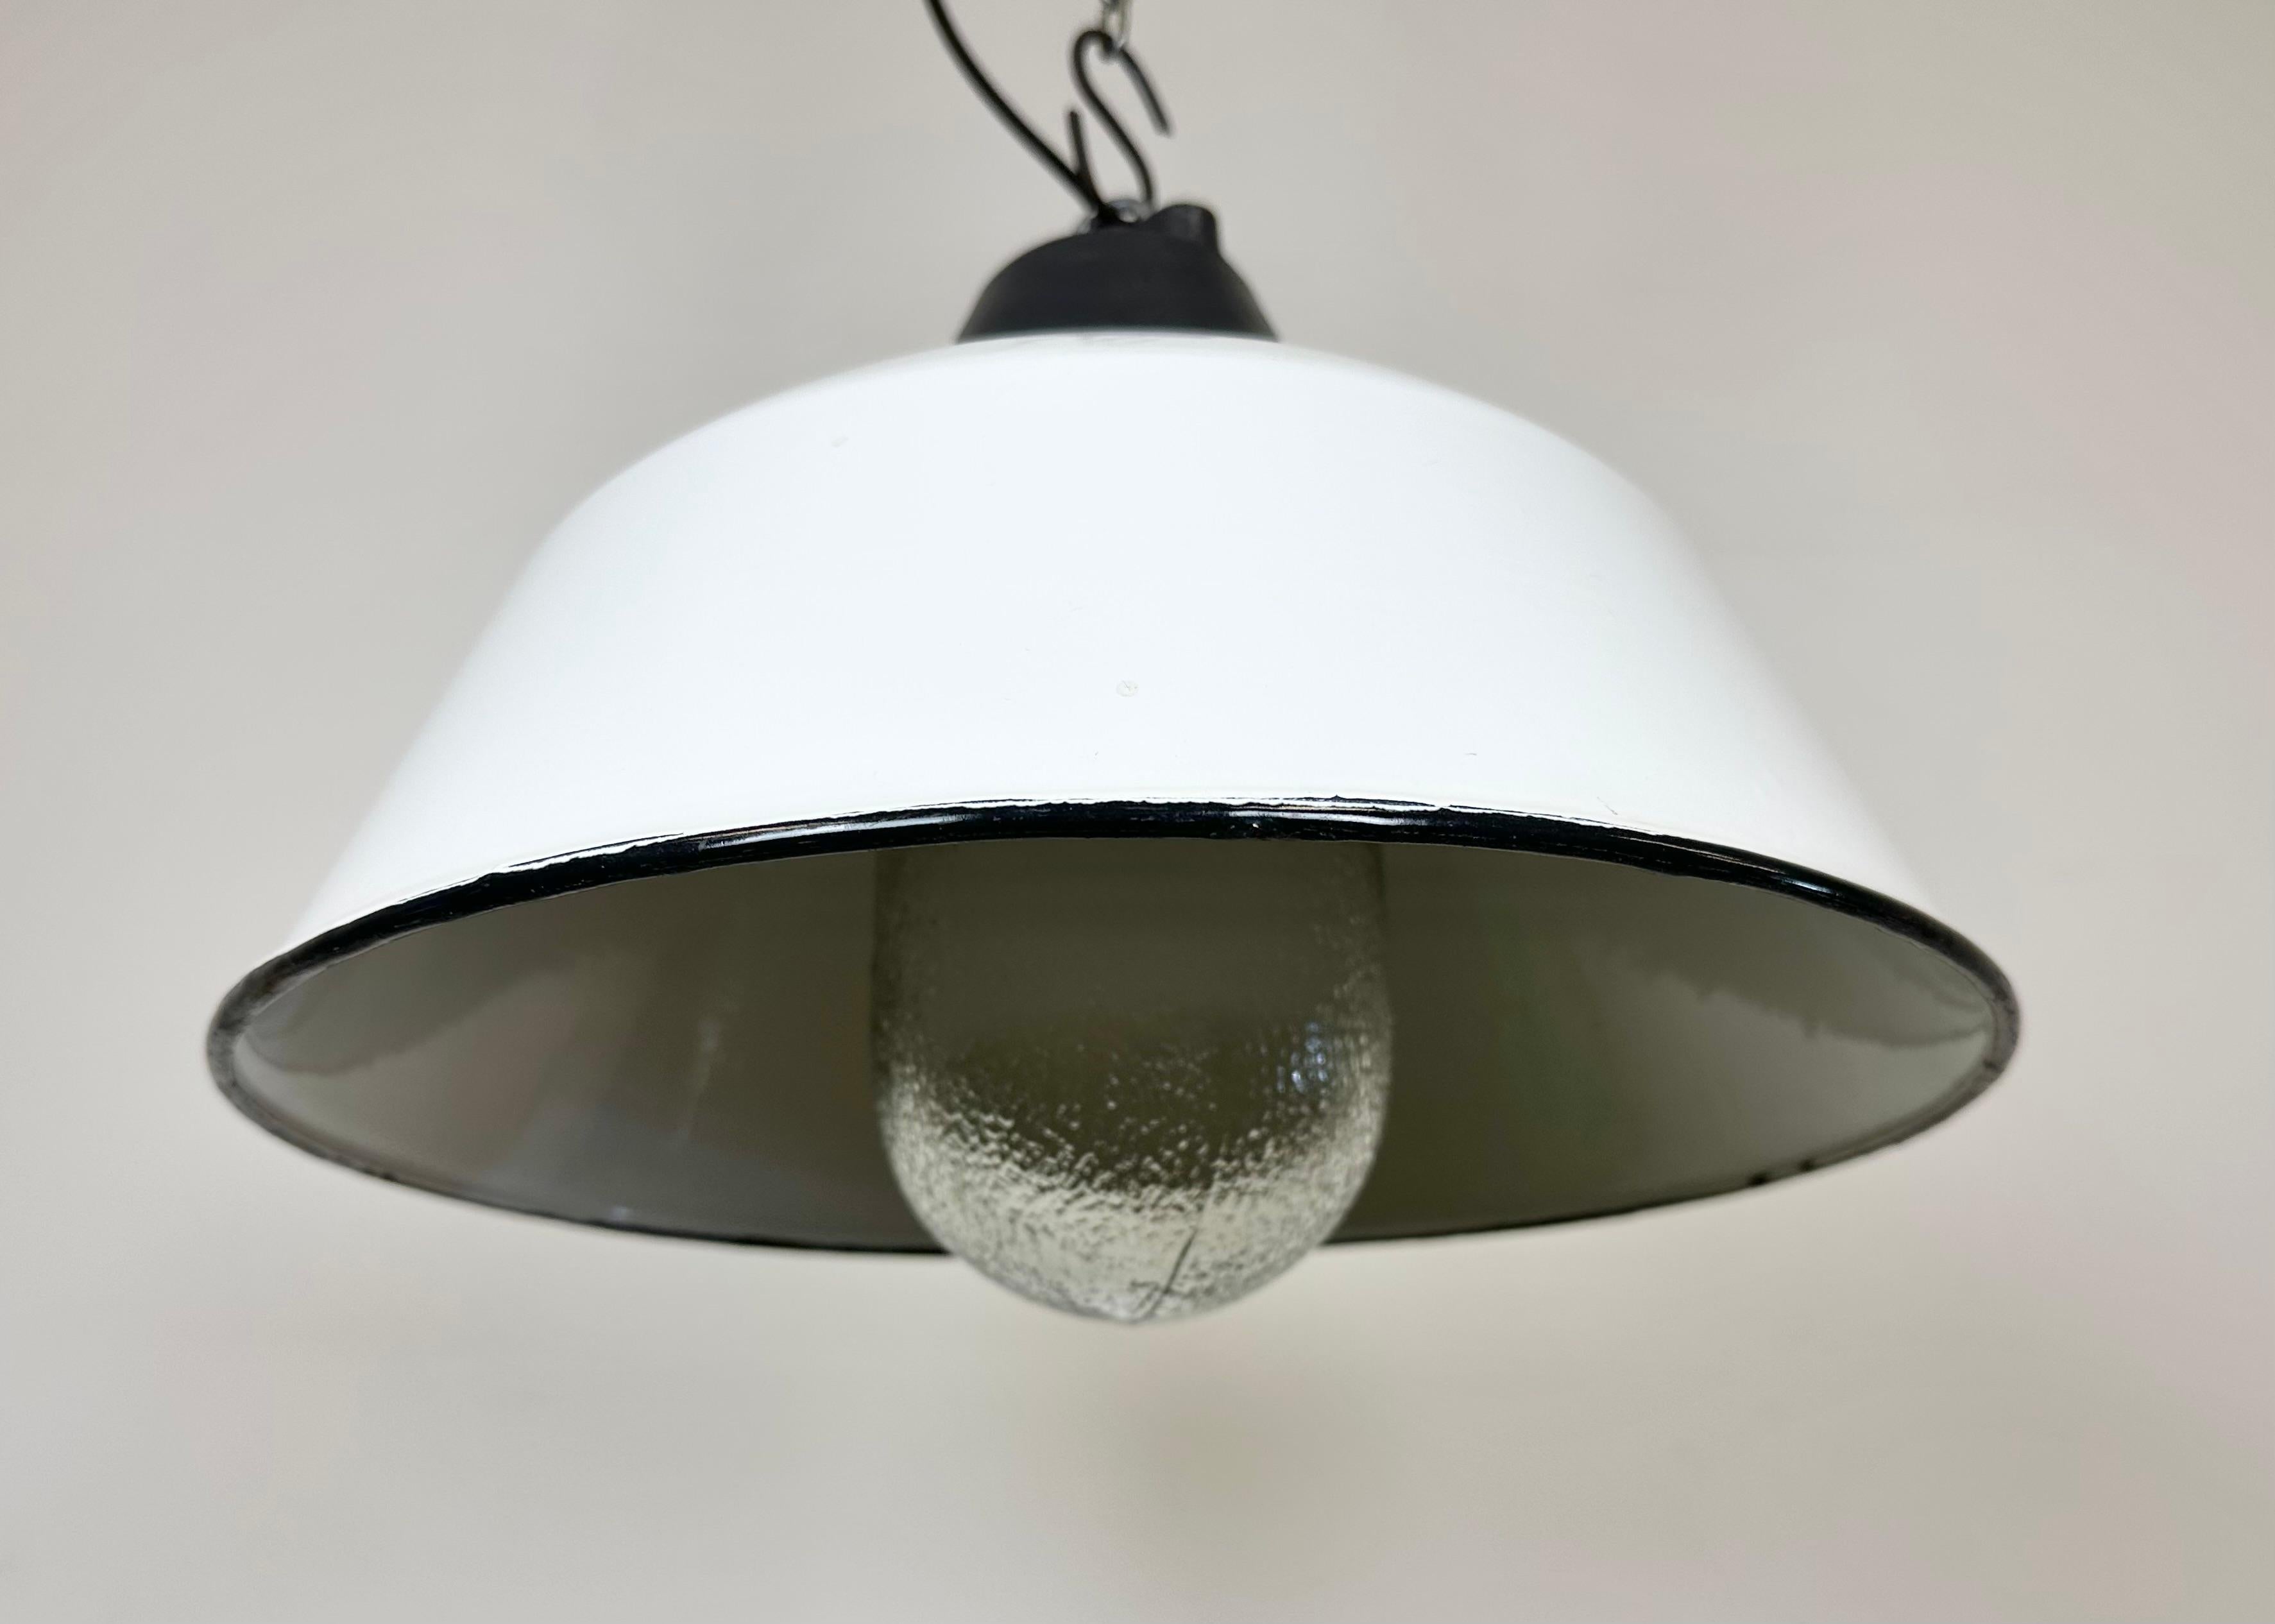 White Enamel and Cast Iron Industrial Pendant Light with Glass Cover, 1960s For Sale 4